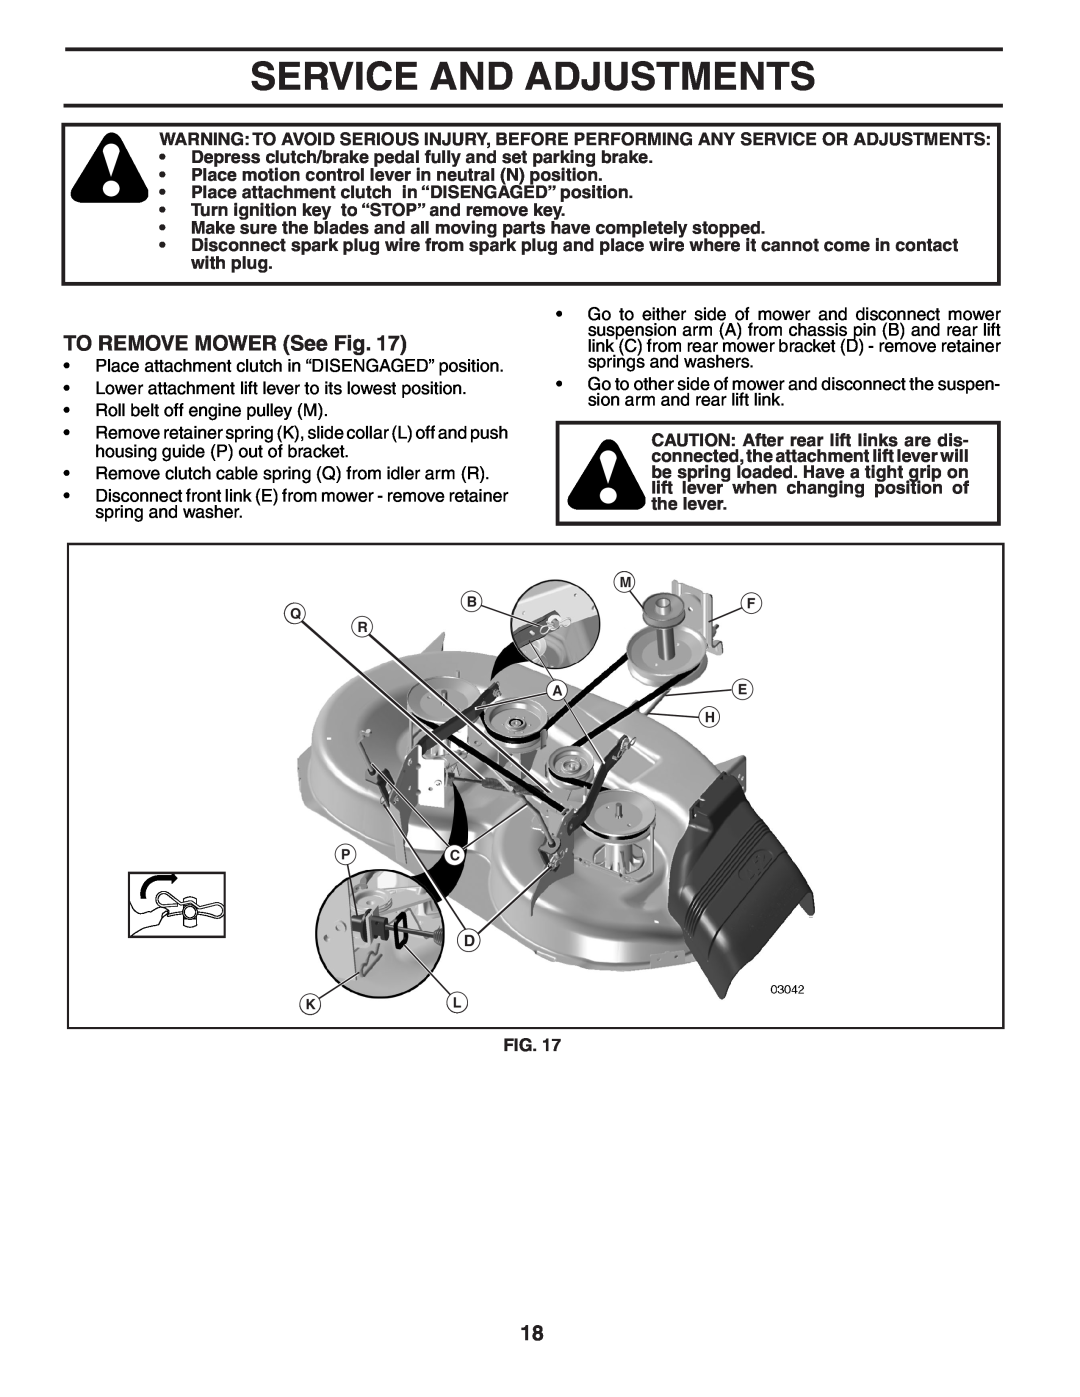 Poulan 402993 manual Service And Adjustments, TO REMOVE MOWER See Fig 